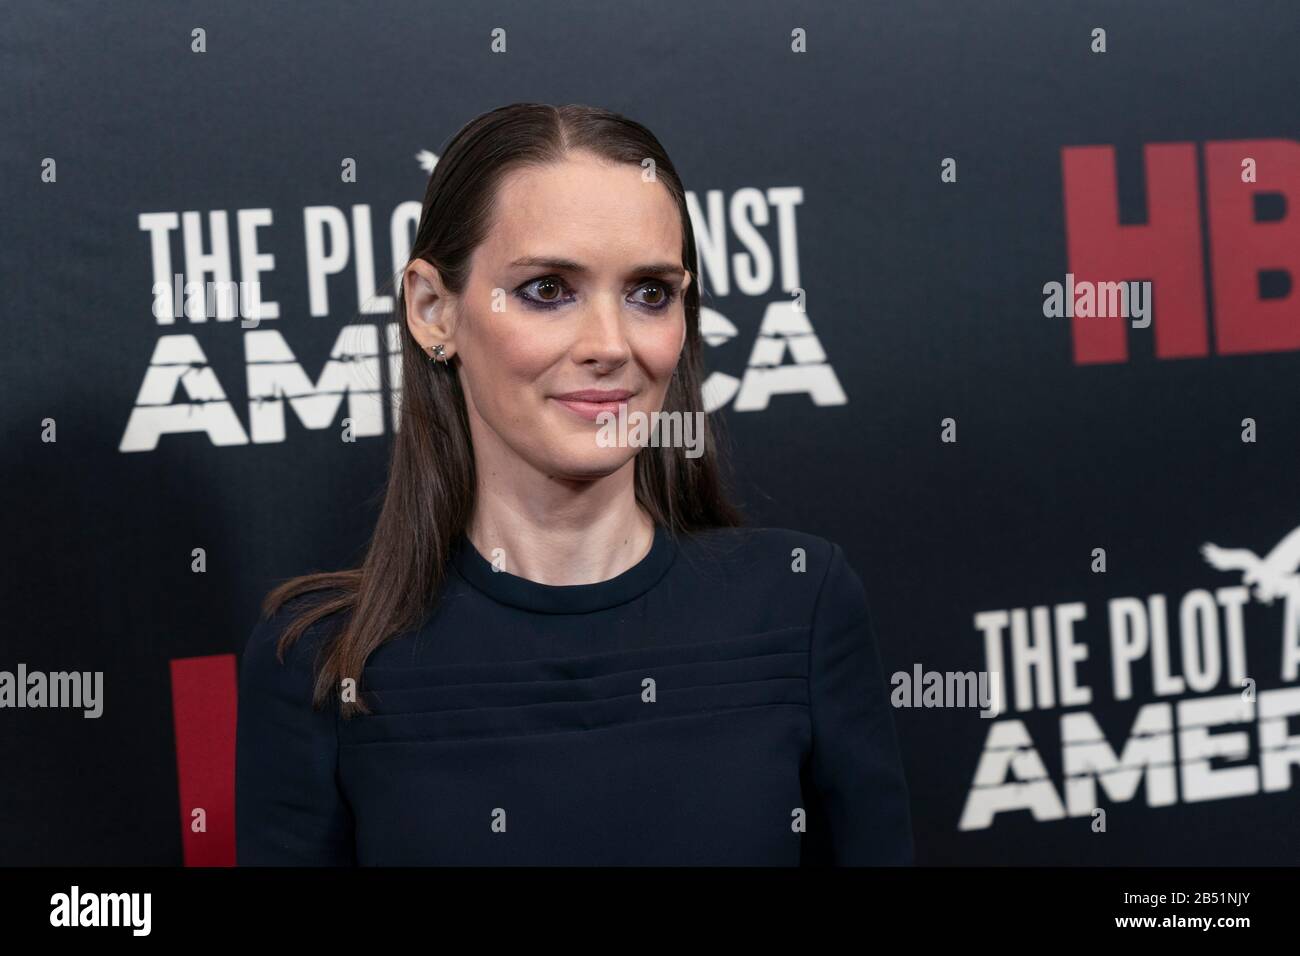 NEW YORK, NY - MARCH 04: Winona Ryder attend HBO's "The Plot Against America" premiere at Florence Gould Hall on March 04, 2020 in New York City. Stock Photo